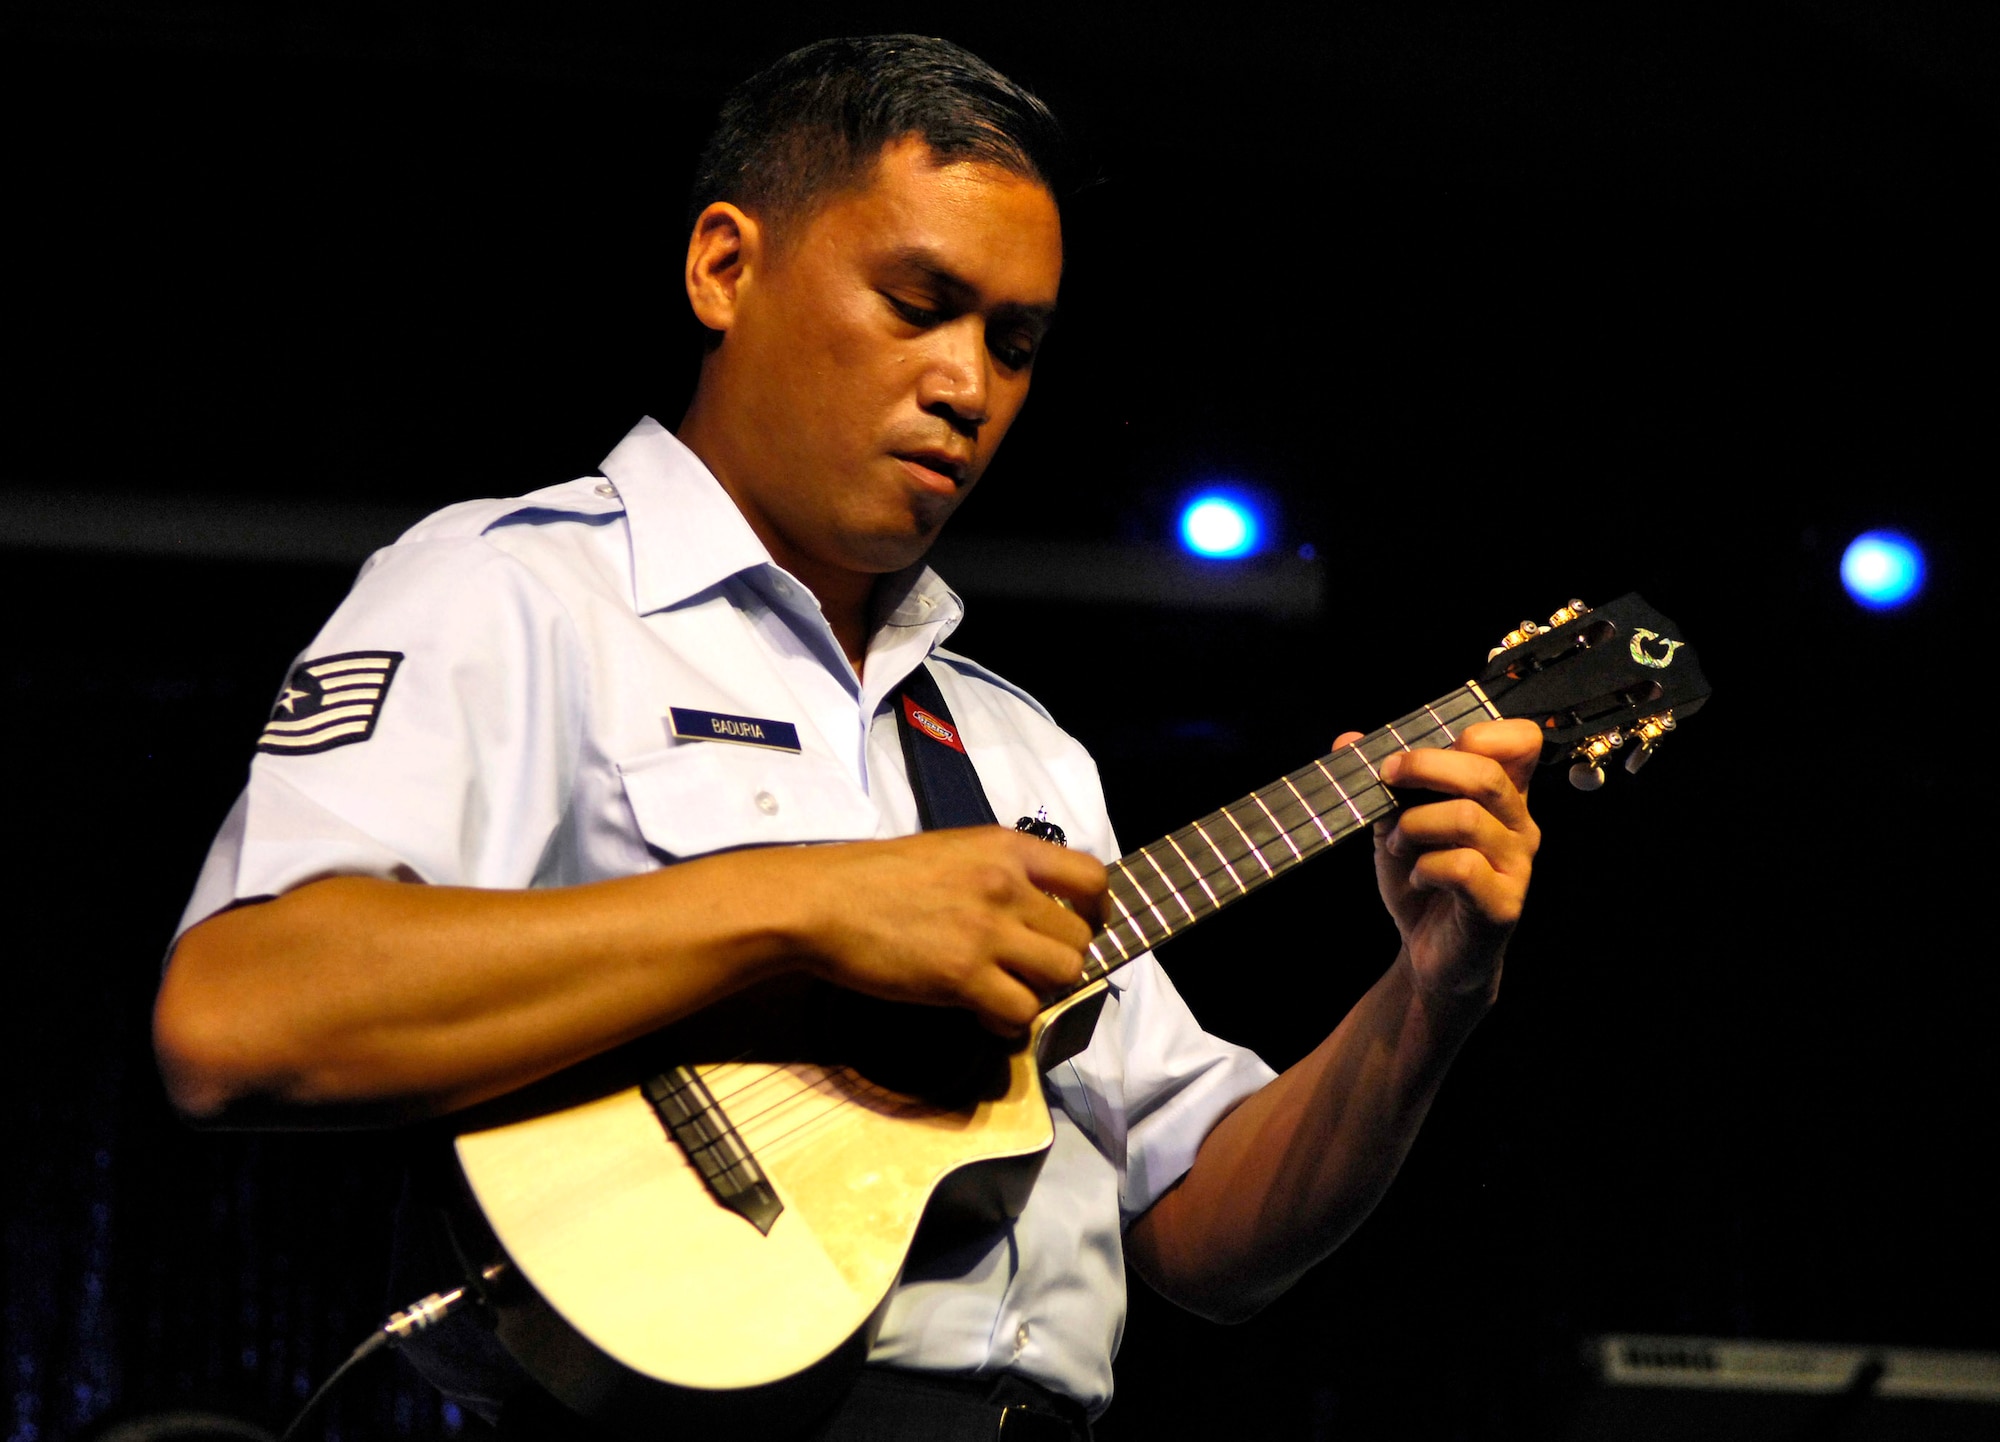 Tech. Sgt. Daniel Baduria plays his ukulele as the opening act for Tops In Blue Sept. 12 at the Waikiki Shell in Honolulu. Sergeant Baduria played as part of the Heritage to Horizons theme of the Air Force's 60th anniversary. His father, Donald Baduria, was an Airman with the Strolling Strings Trio in the Air Force's Tops In Blue entertainment showcase in the 1950s and began teaching him to play the ukulele at age four. Sergeant Baduria, who lost his father to cancer more than 20 years ago, honored his memory during the performance. Tops In Blue, the Air Force's signature entertainment group, gave a free performance for the public to celebrate Air Force Week Honolulu and the Air Force's 60th anniversary. Sergeant Baduria, is an aircraft fuel systems specialist with the Hawaii Air National Guard's 154th Wing. (U.S. Air Force photo/Tech. Sgt. Shane A. Cuomo)